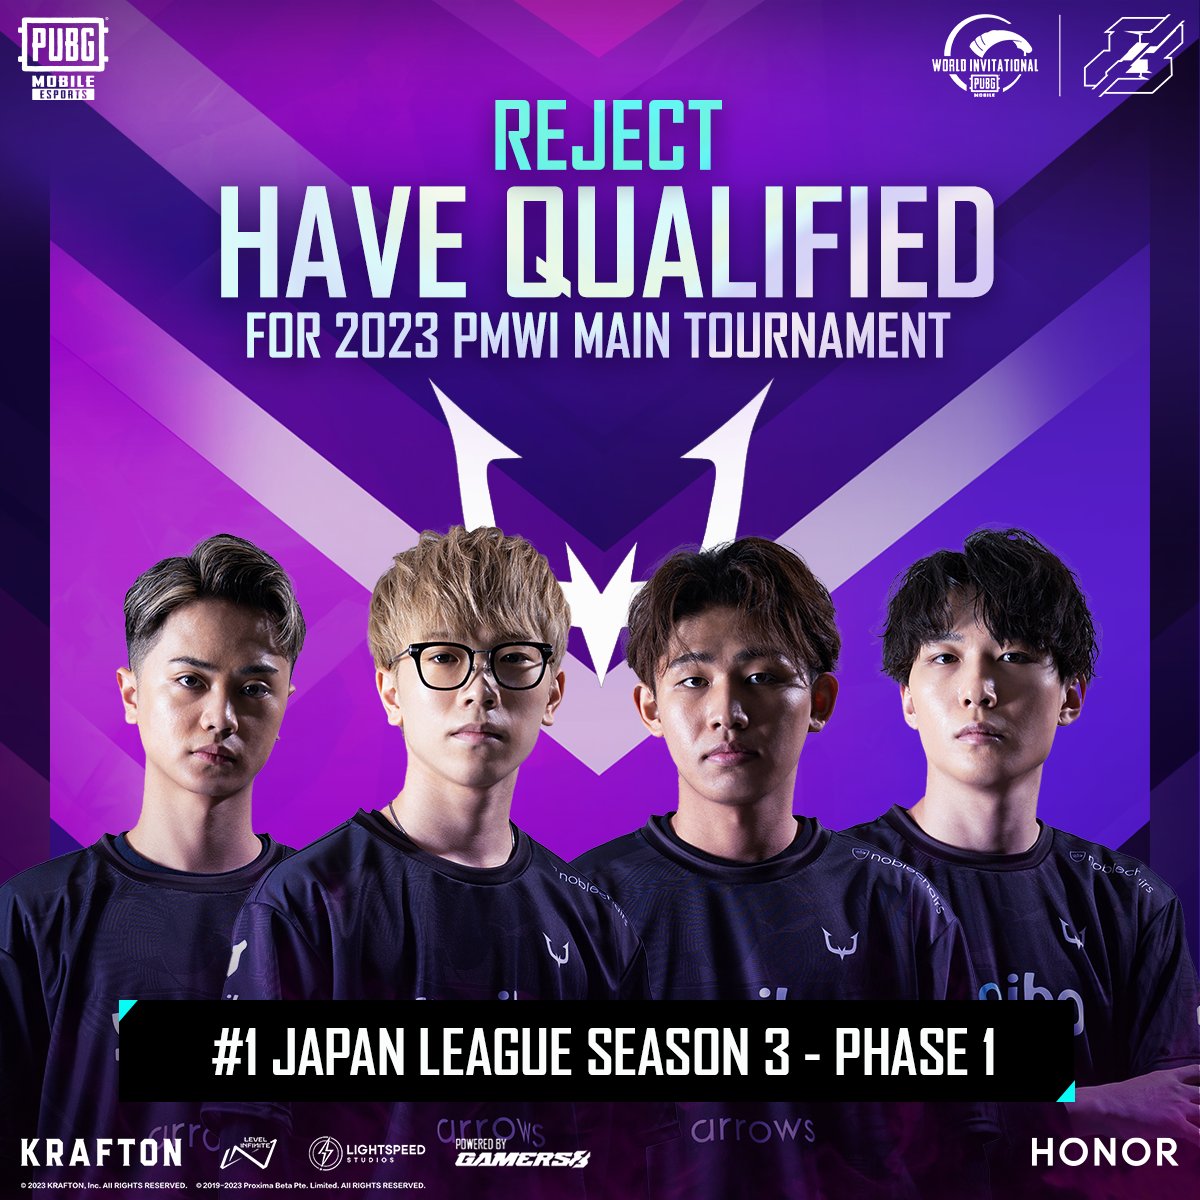 The Japan representatives have been decided! 🤩

GG well played Reject for winning the Japan League and qualifying directly for the 2023 PMWI Main Tournament! 🥇

#Gamers8 | #TheLandOfHeroes

#PUBGMOBILE #PUBGMESPORTS #PMWI #2023PMWI